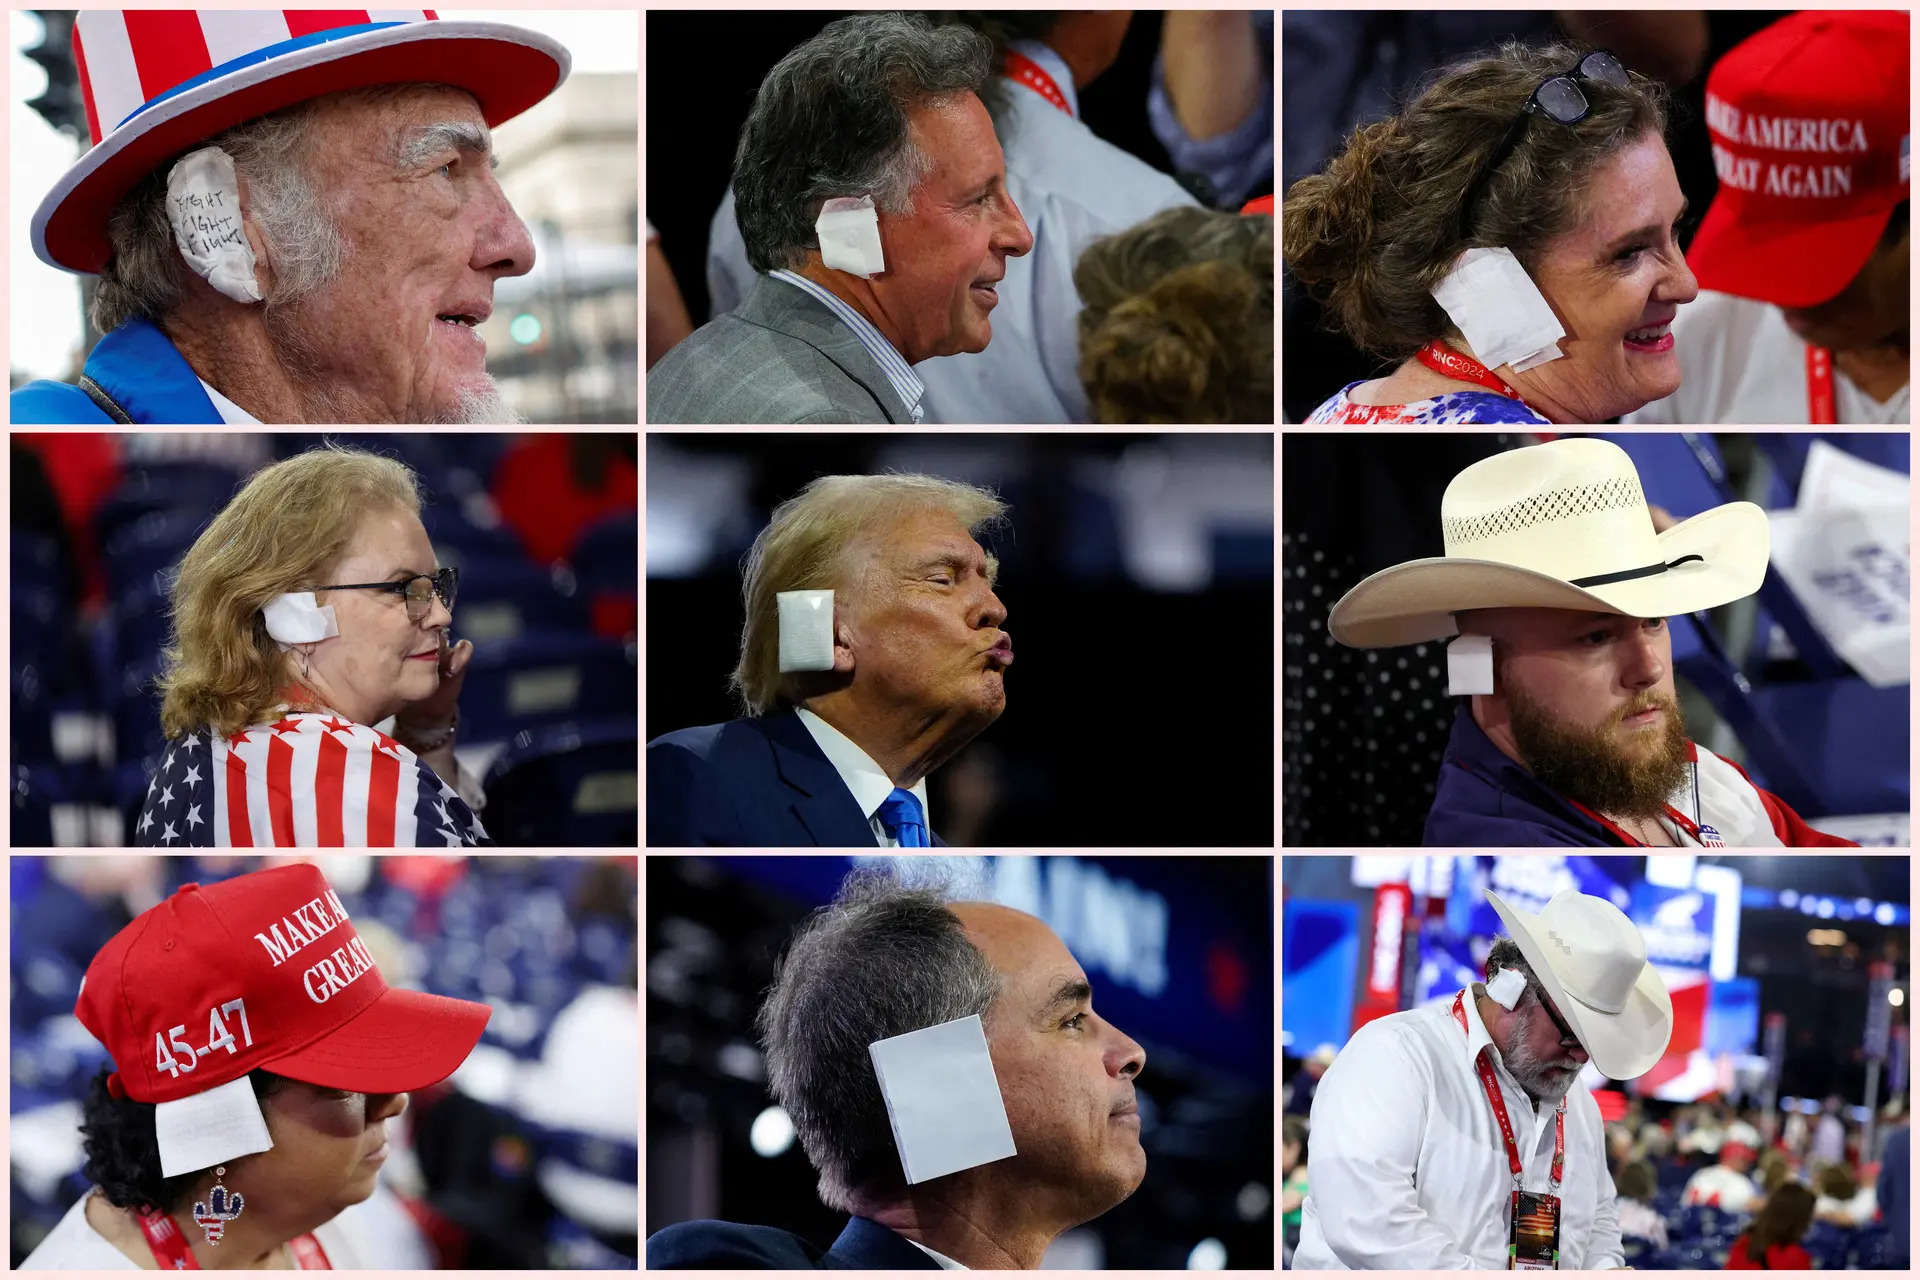 Donald Trump supporters turn assassination attempt injury into a fashion statement in support of the Republican 